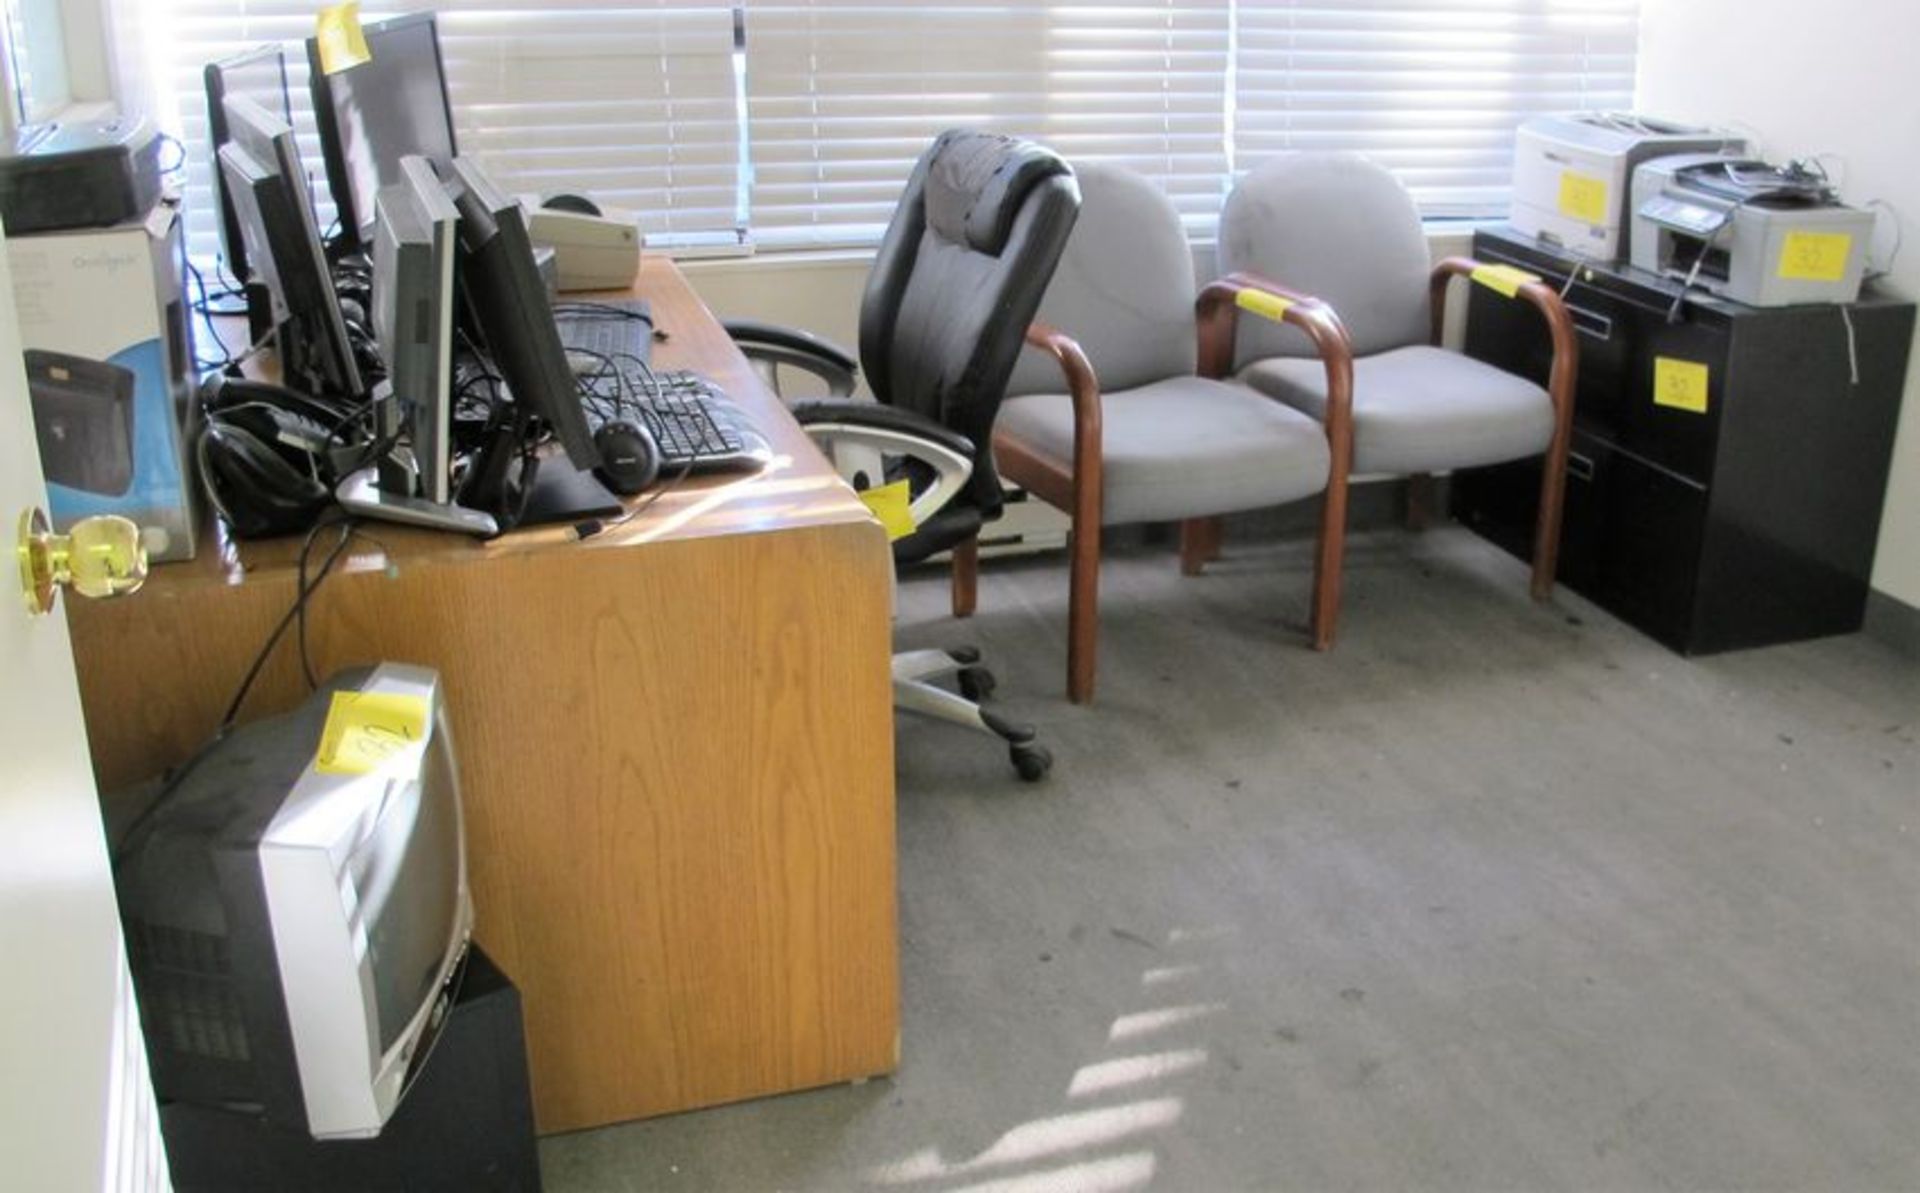 LOT OF ASST. OFFICE FURNITURE, DESK, CHAIRS, SHELVES, FILE CABINET, PRINTERS, MONITORS, KEYBOARDS,